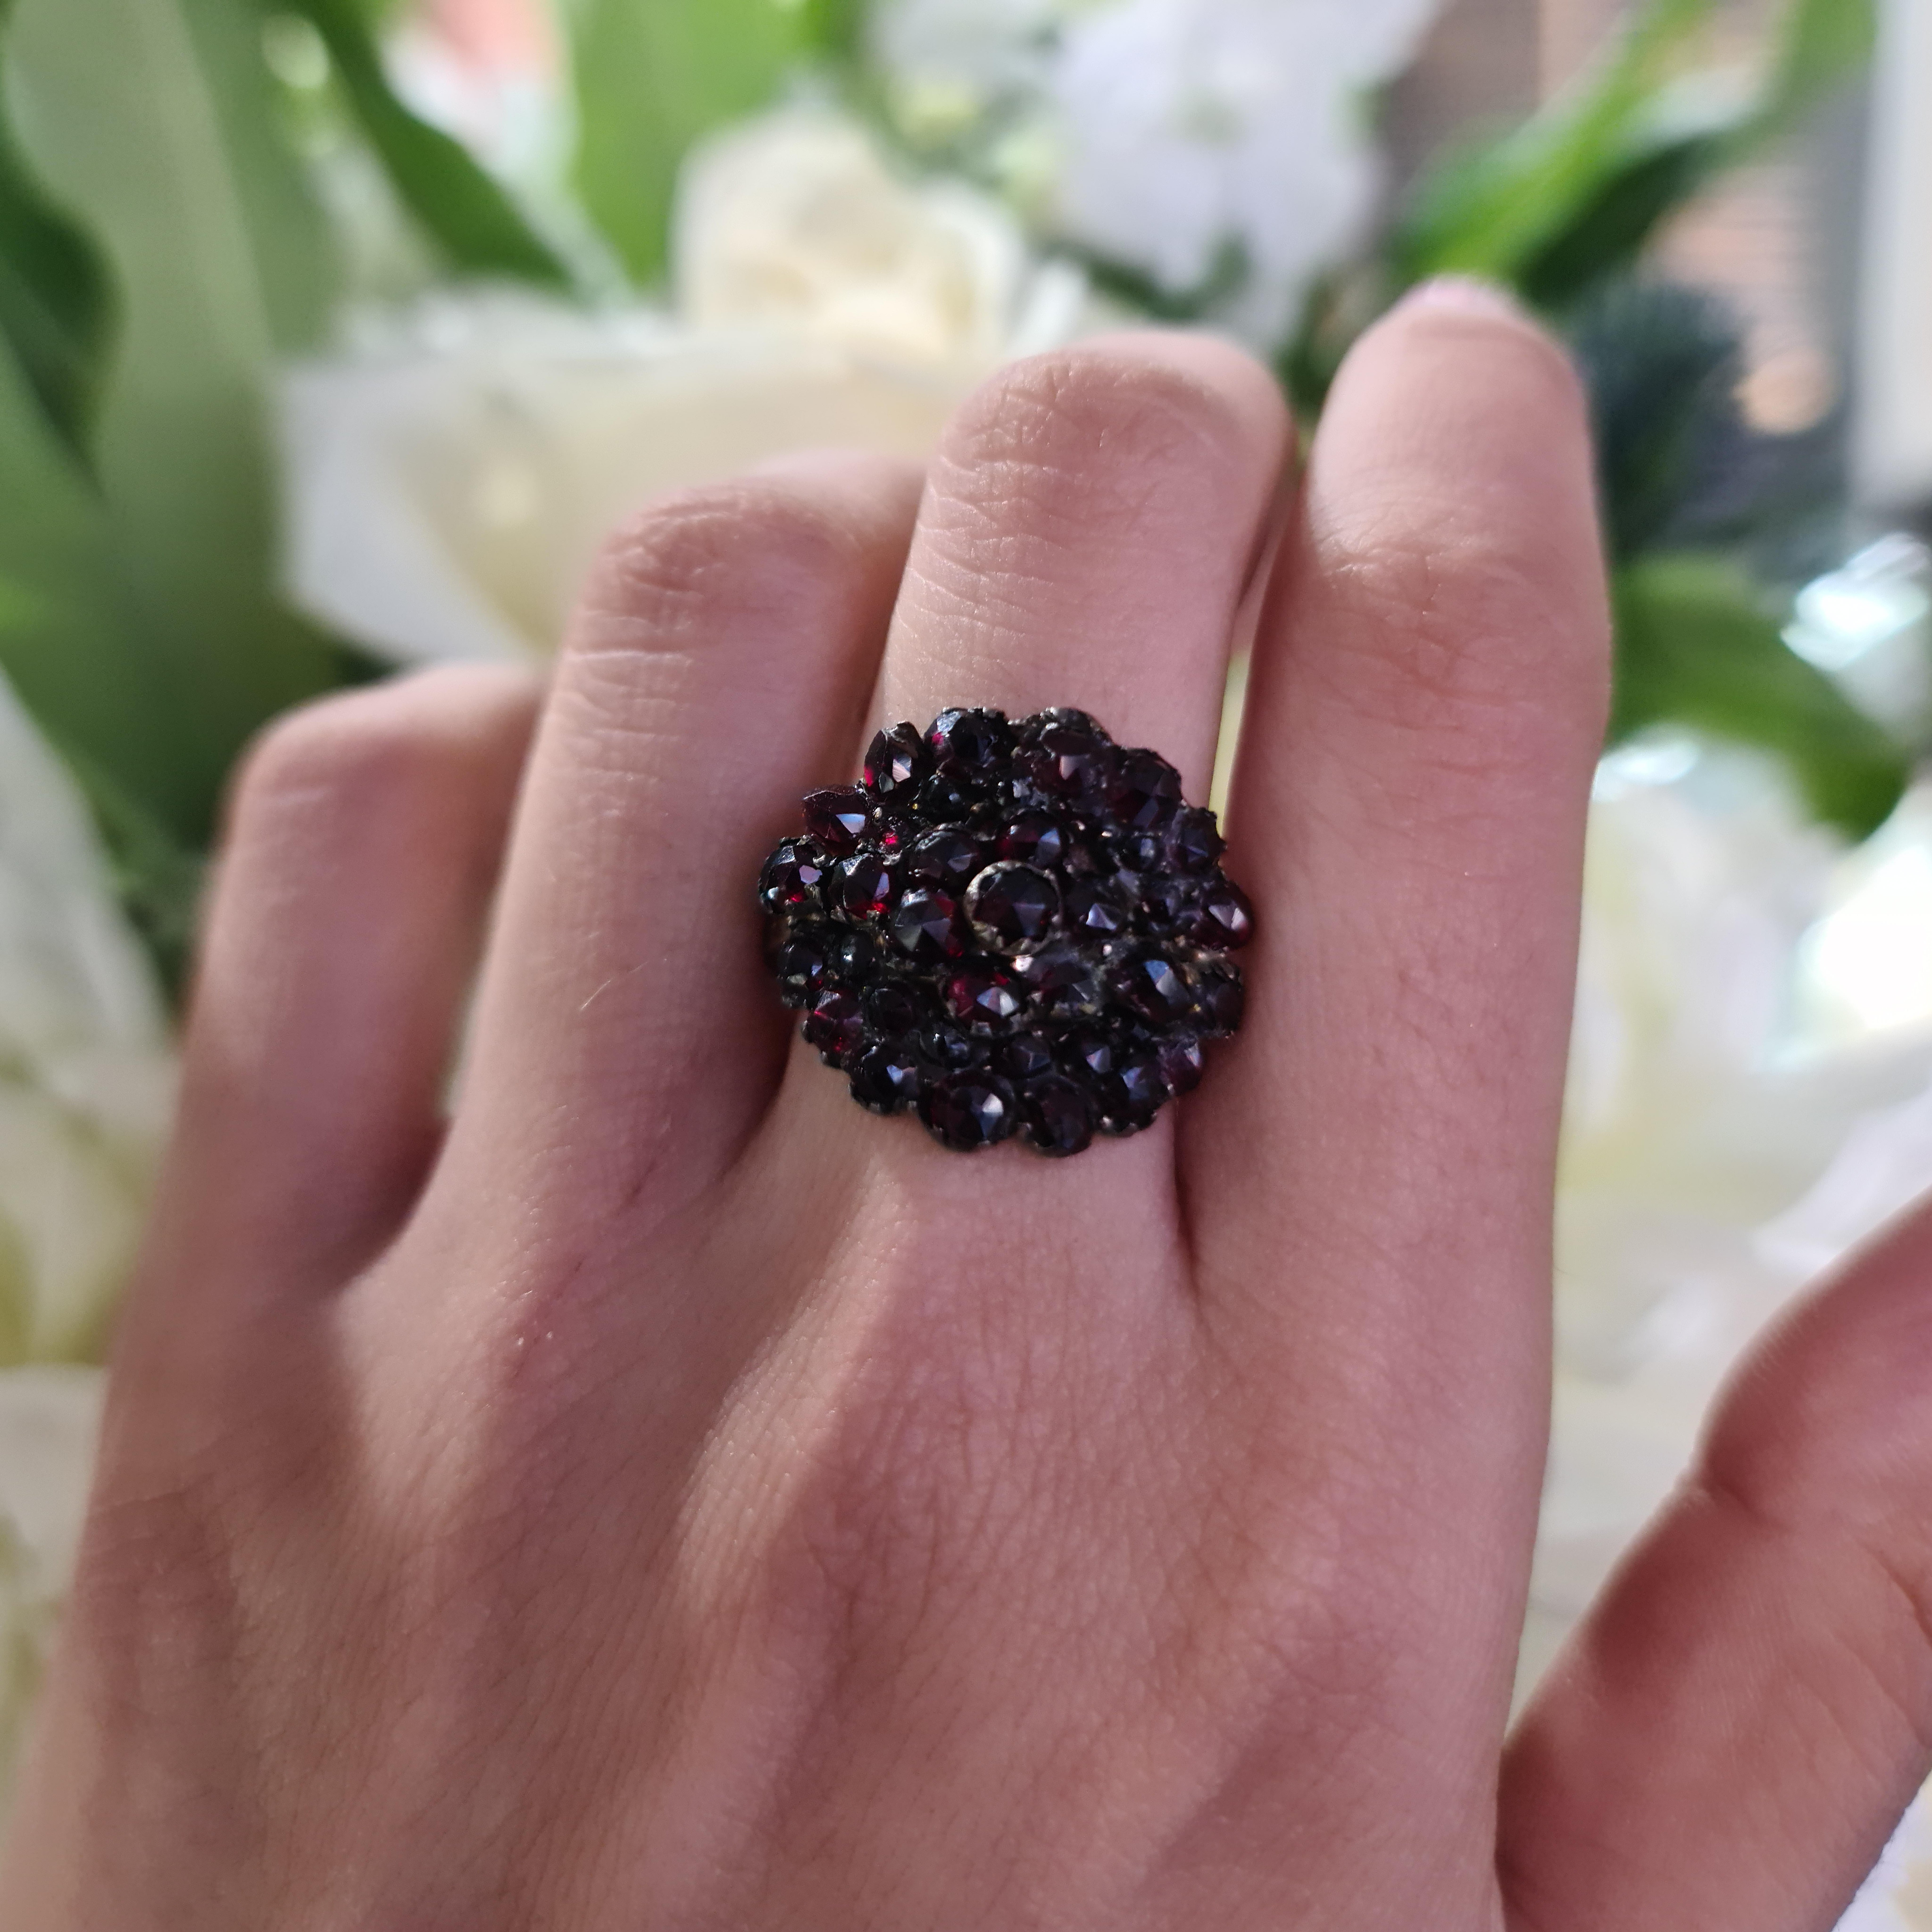 A Bohemian garnet cluster ring, set with deep red, rose-cut, Bohemian garnets, set in silver, with a flat gold shank, circa 1890. It should be noted that the garnets have been glued into their settings.  

Garnets have been used in jewellery